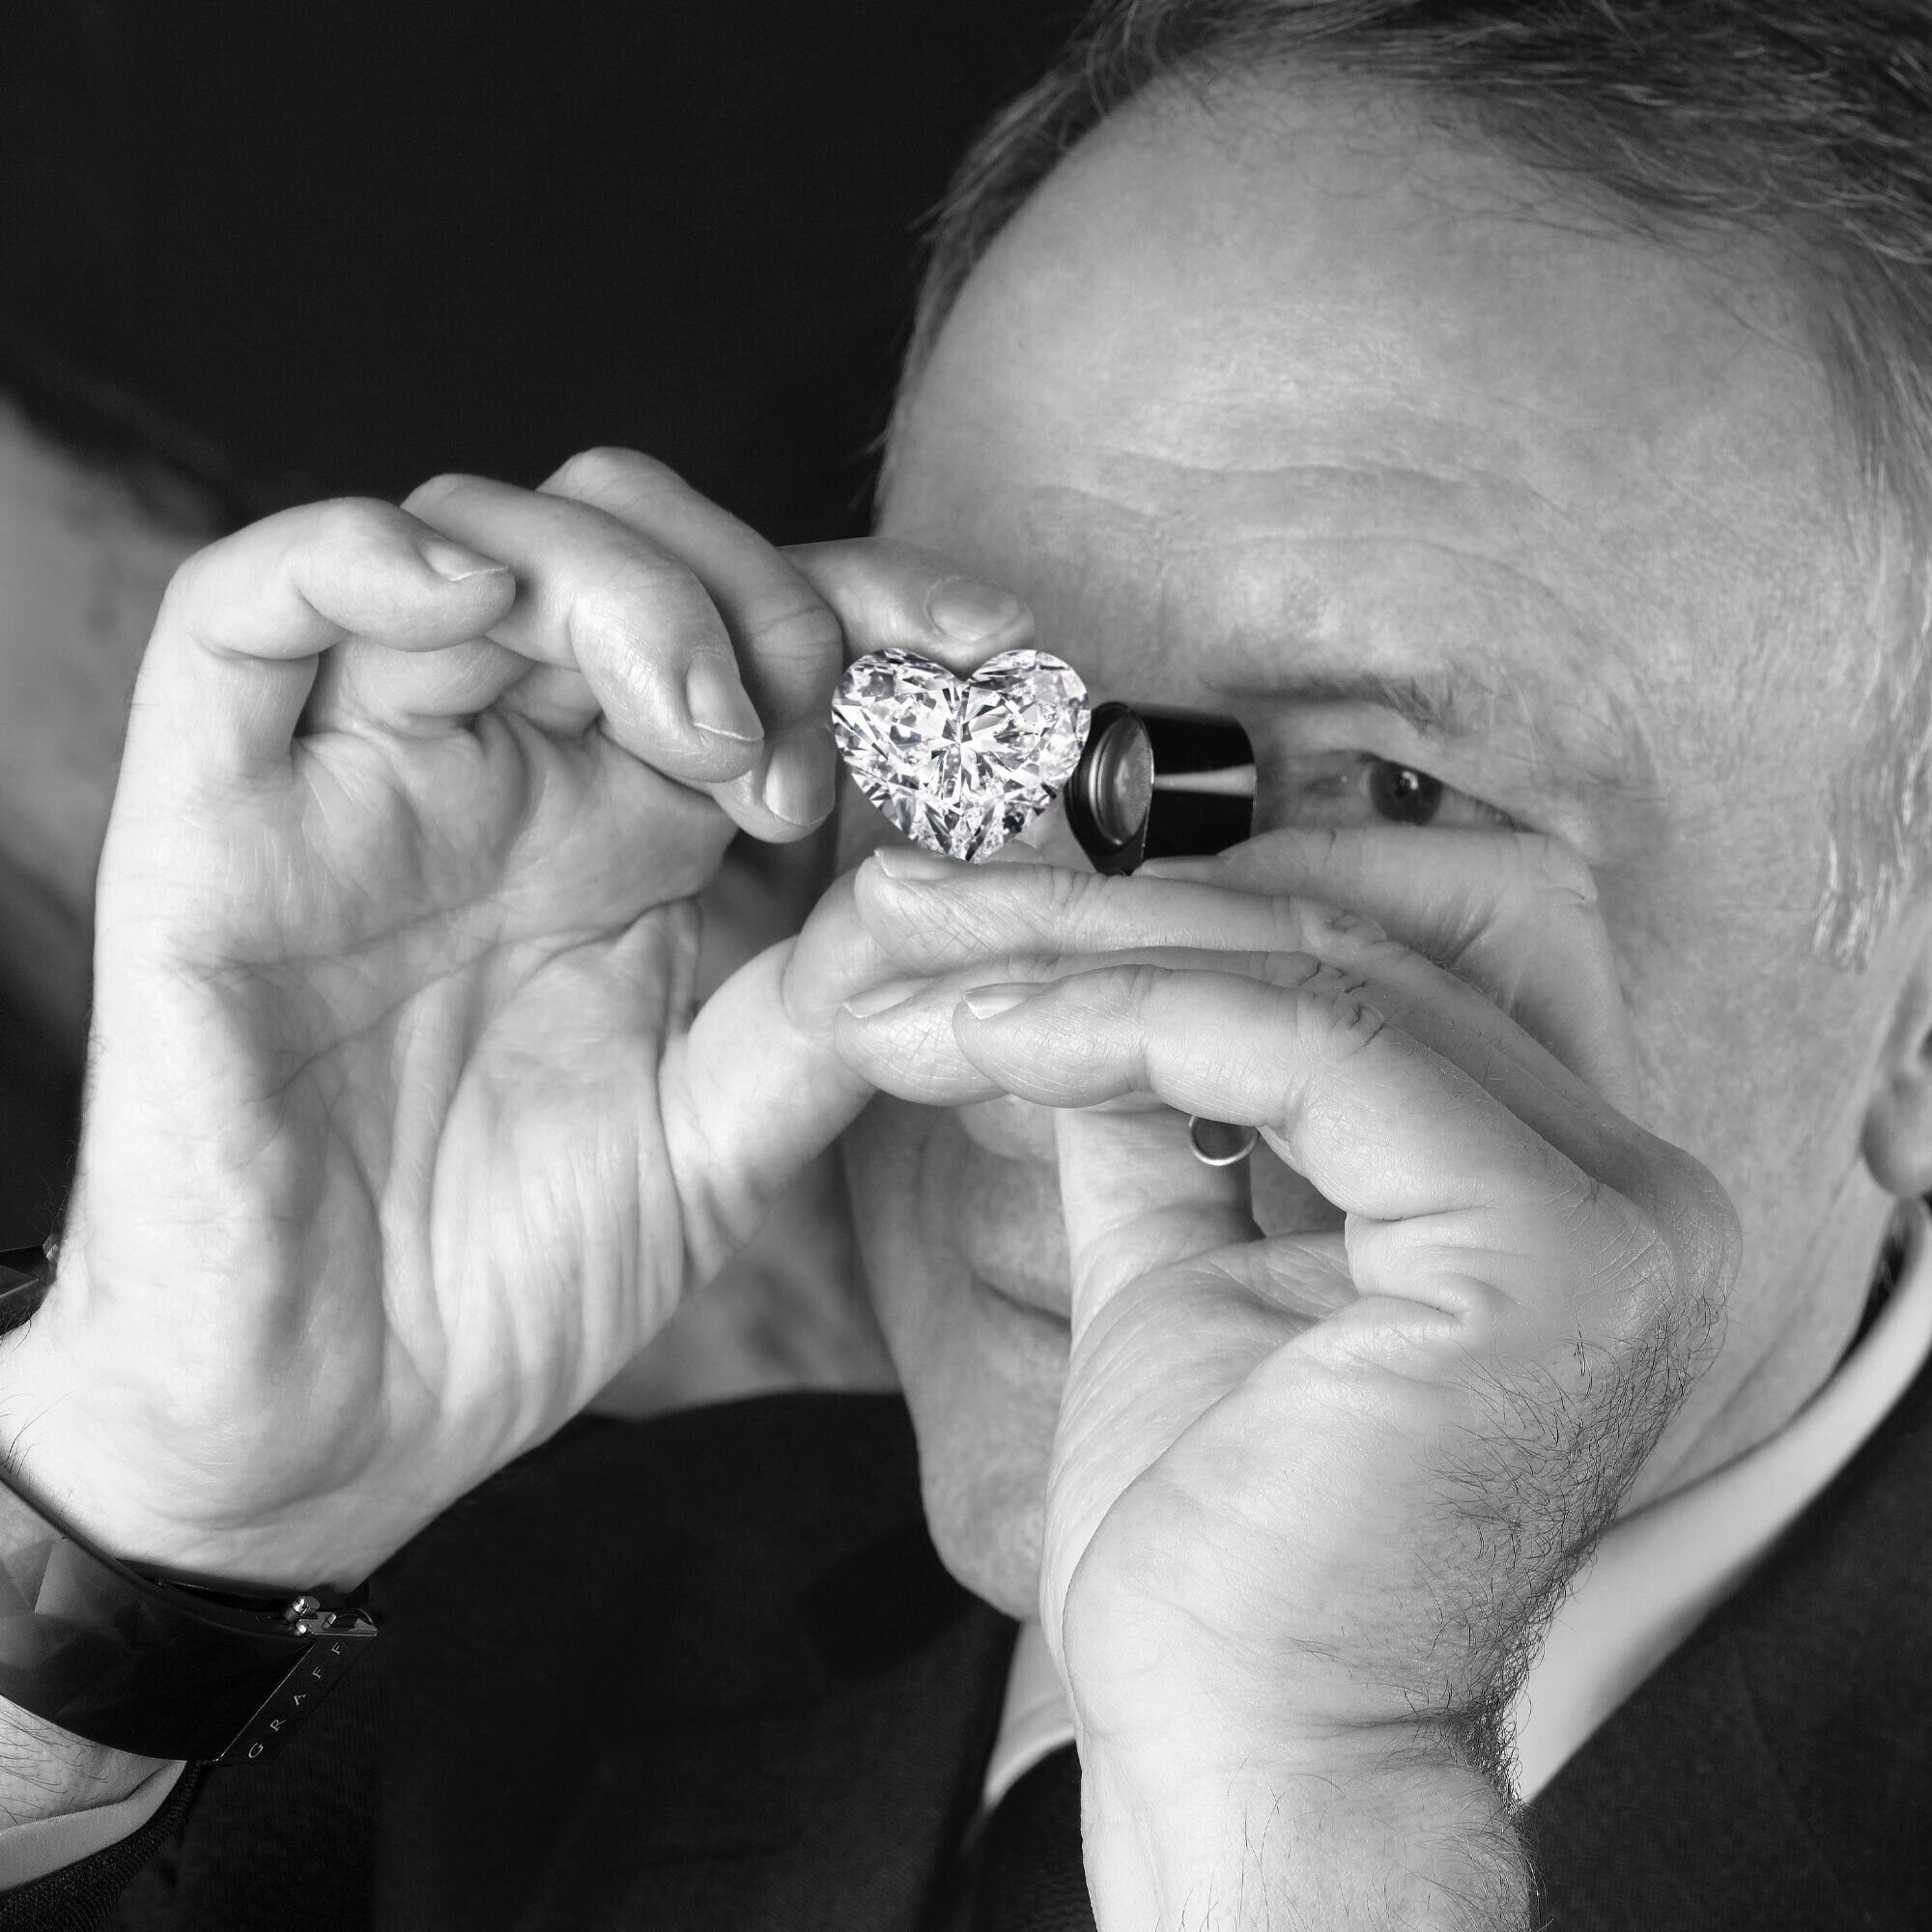 Mr Laurence Graff looking into a heart shape diamond through a loupe